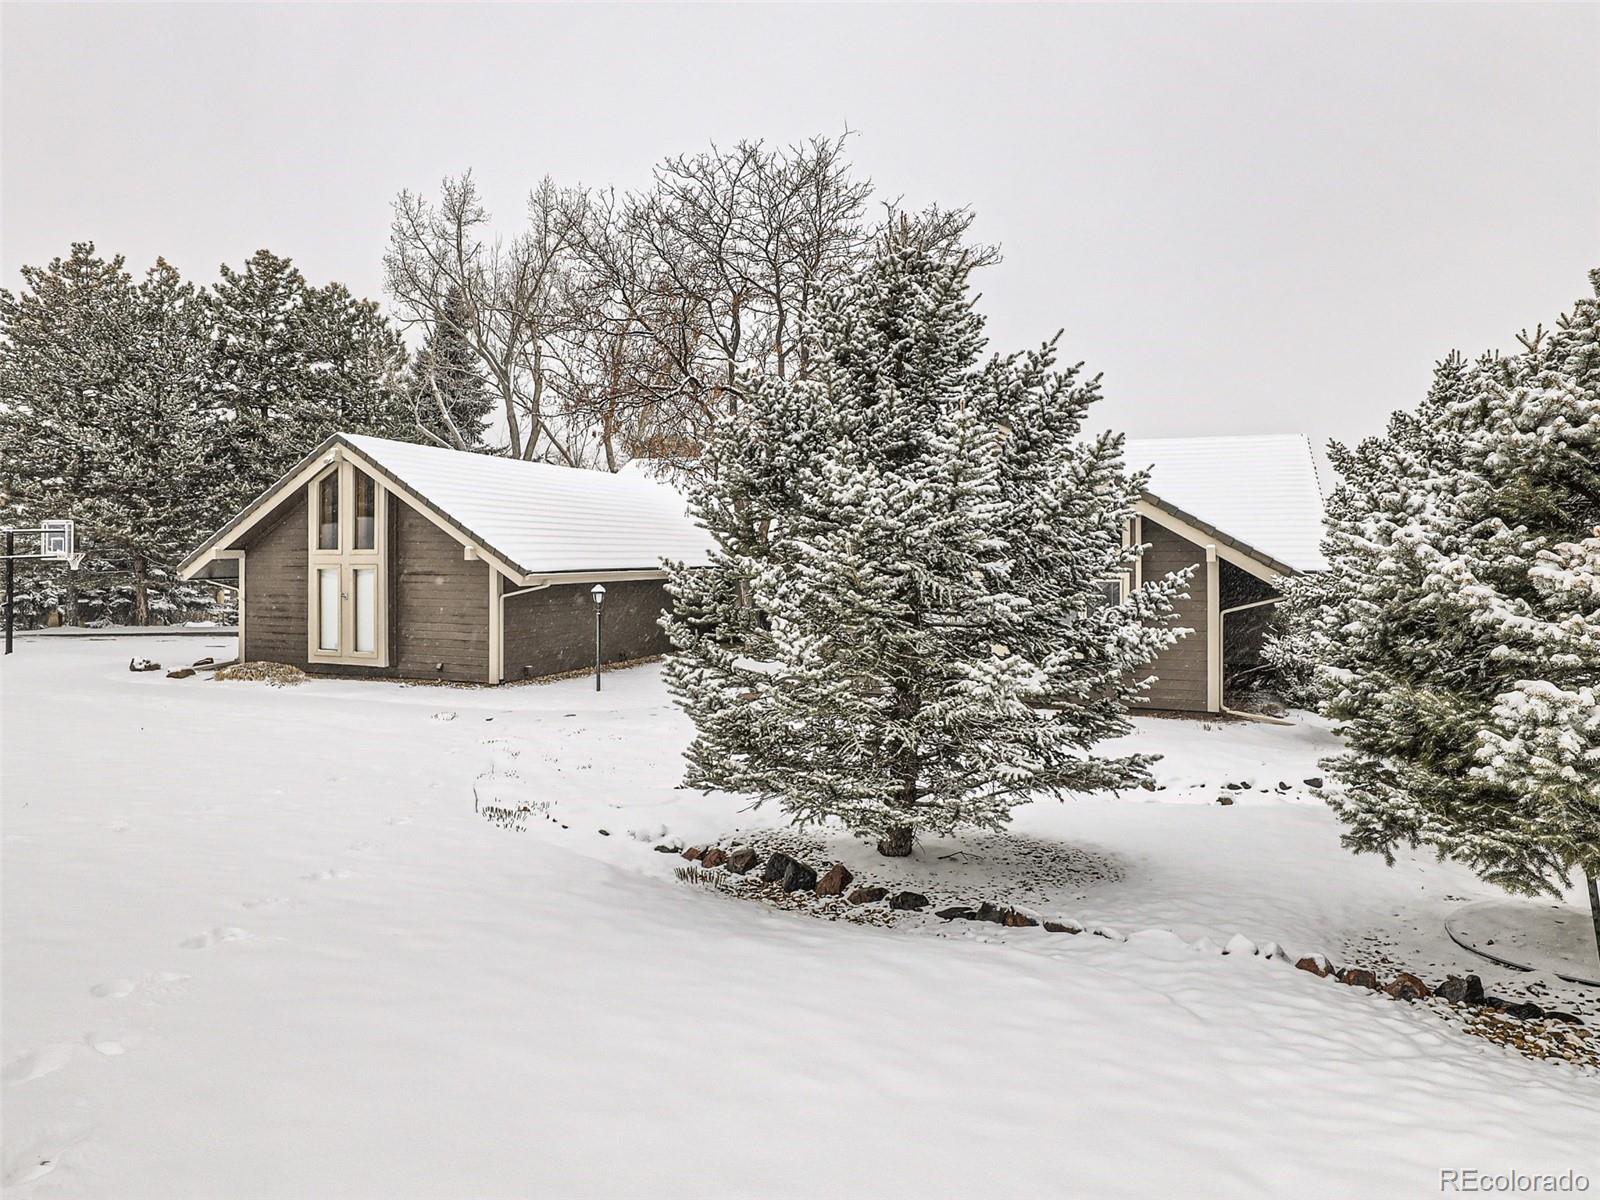 Report Image for 17 N Ranch Road,Littleton, Colorado